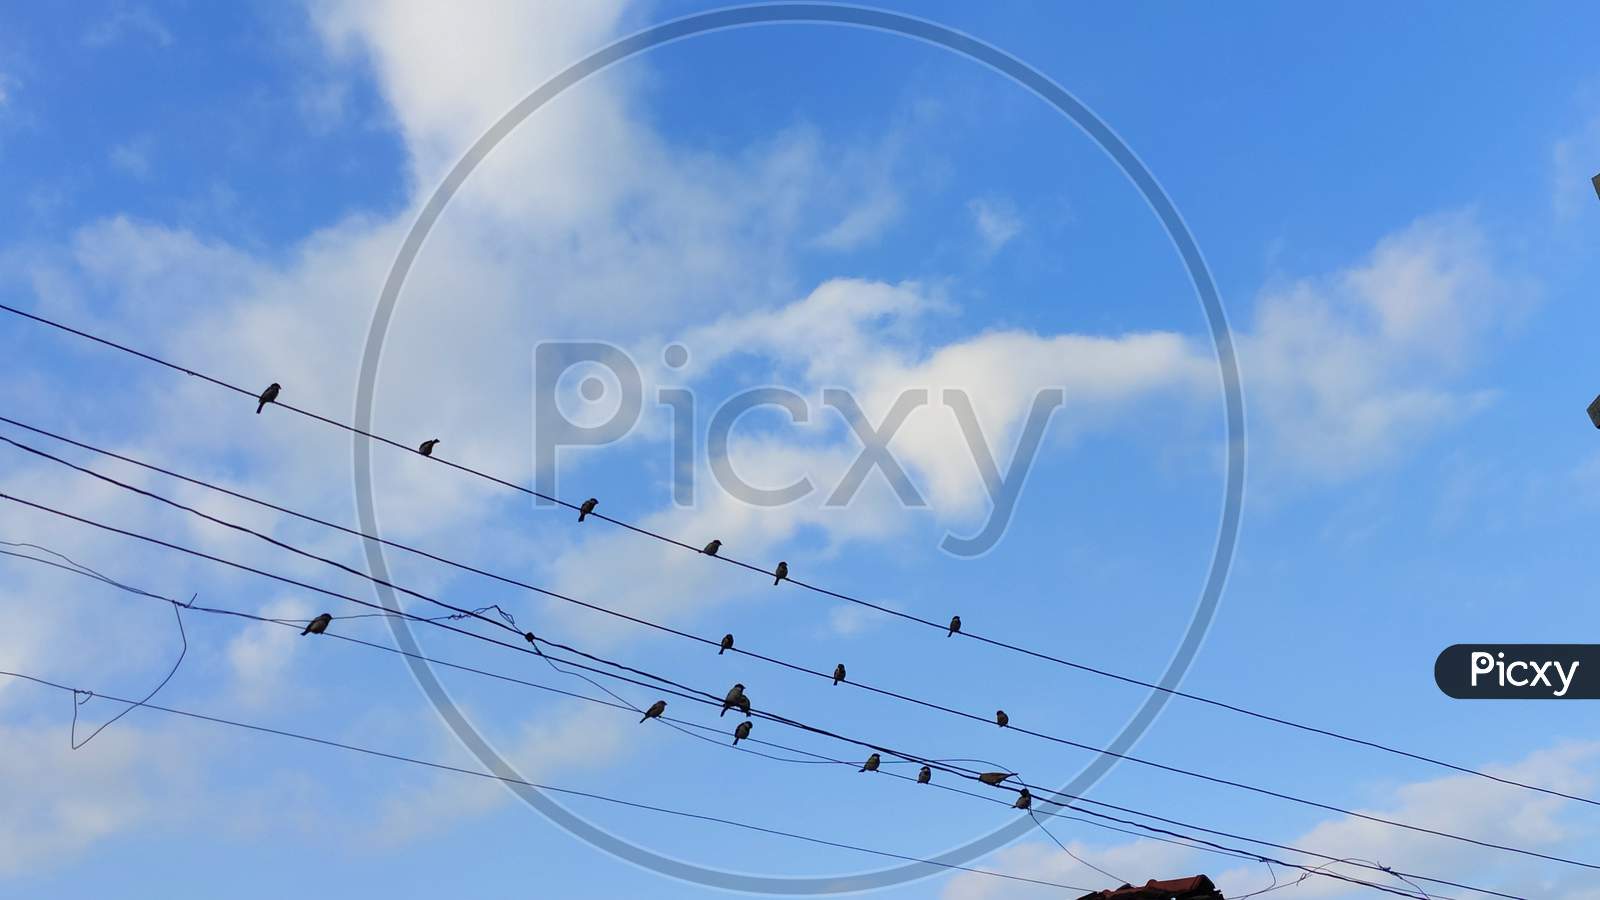 Sparrows sitting on electricity cables